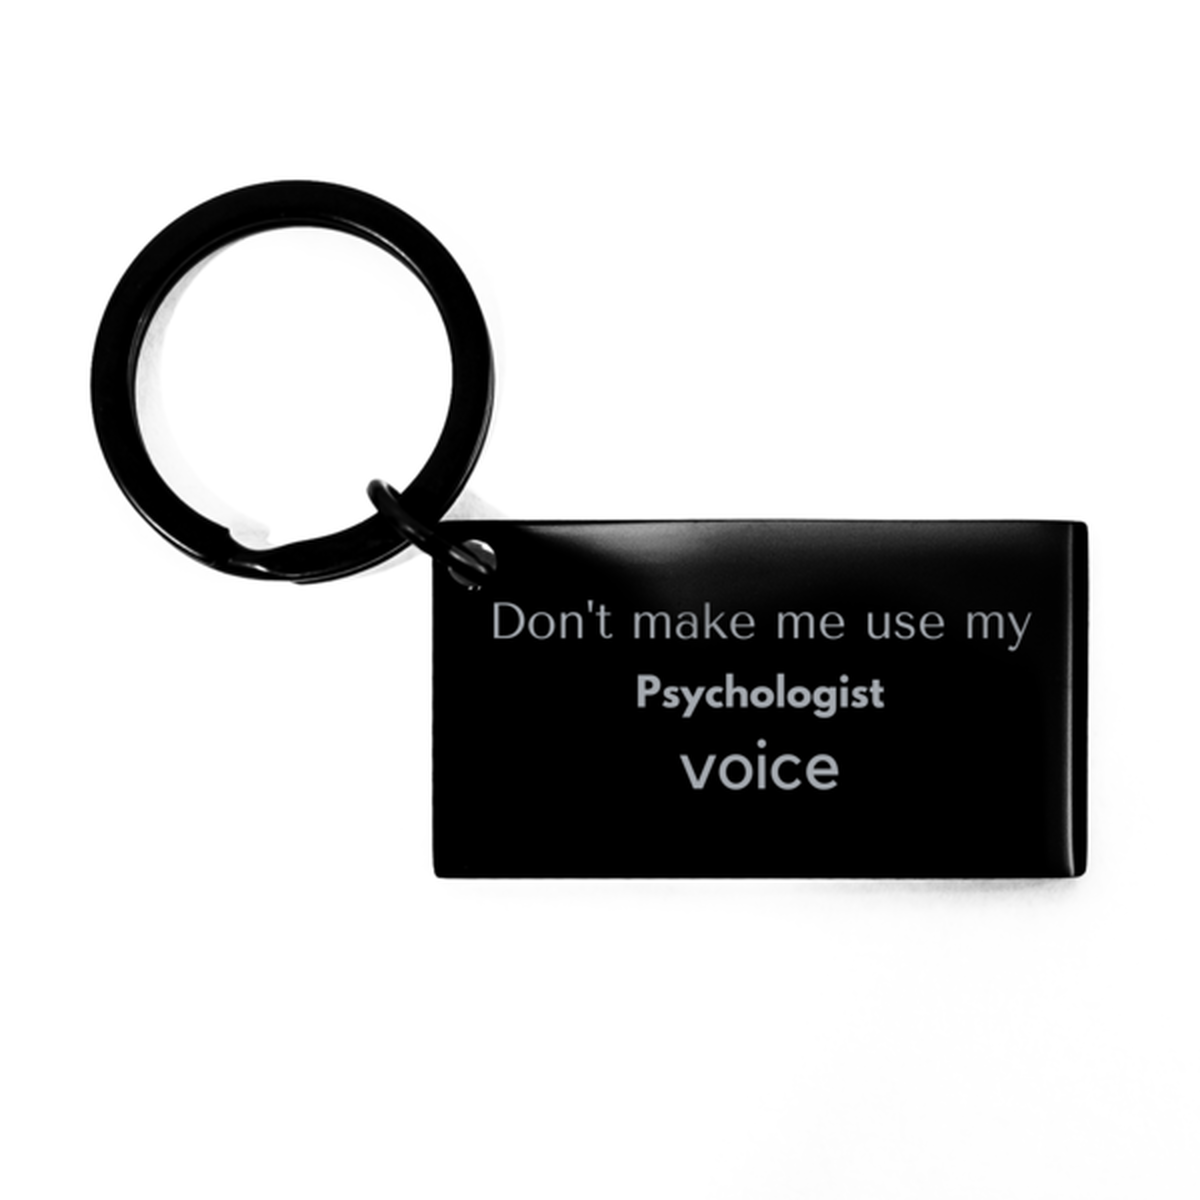 Don't make me use my Psychologist voice, Sarcasm Psychologist Gifts, Christmas Psychologist Keychain Birthday Unique Gifts For Psychologist Coworkers, Men, Women, Colleague, Friends